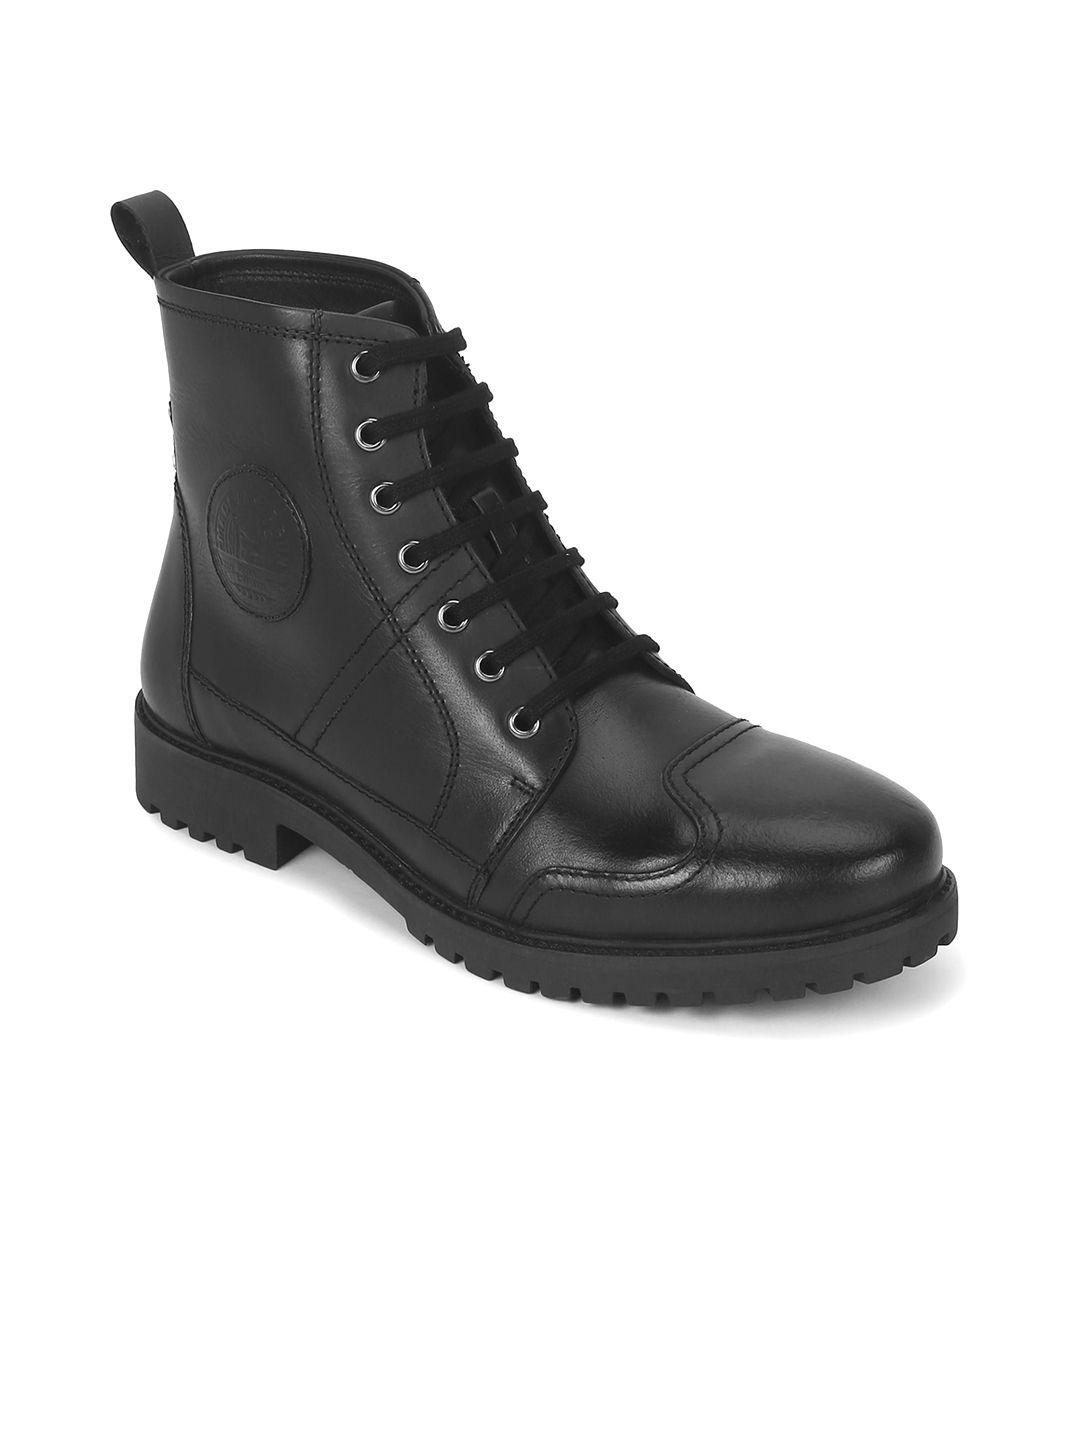 royal enfield men leather high-top boots